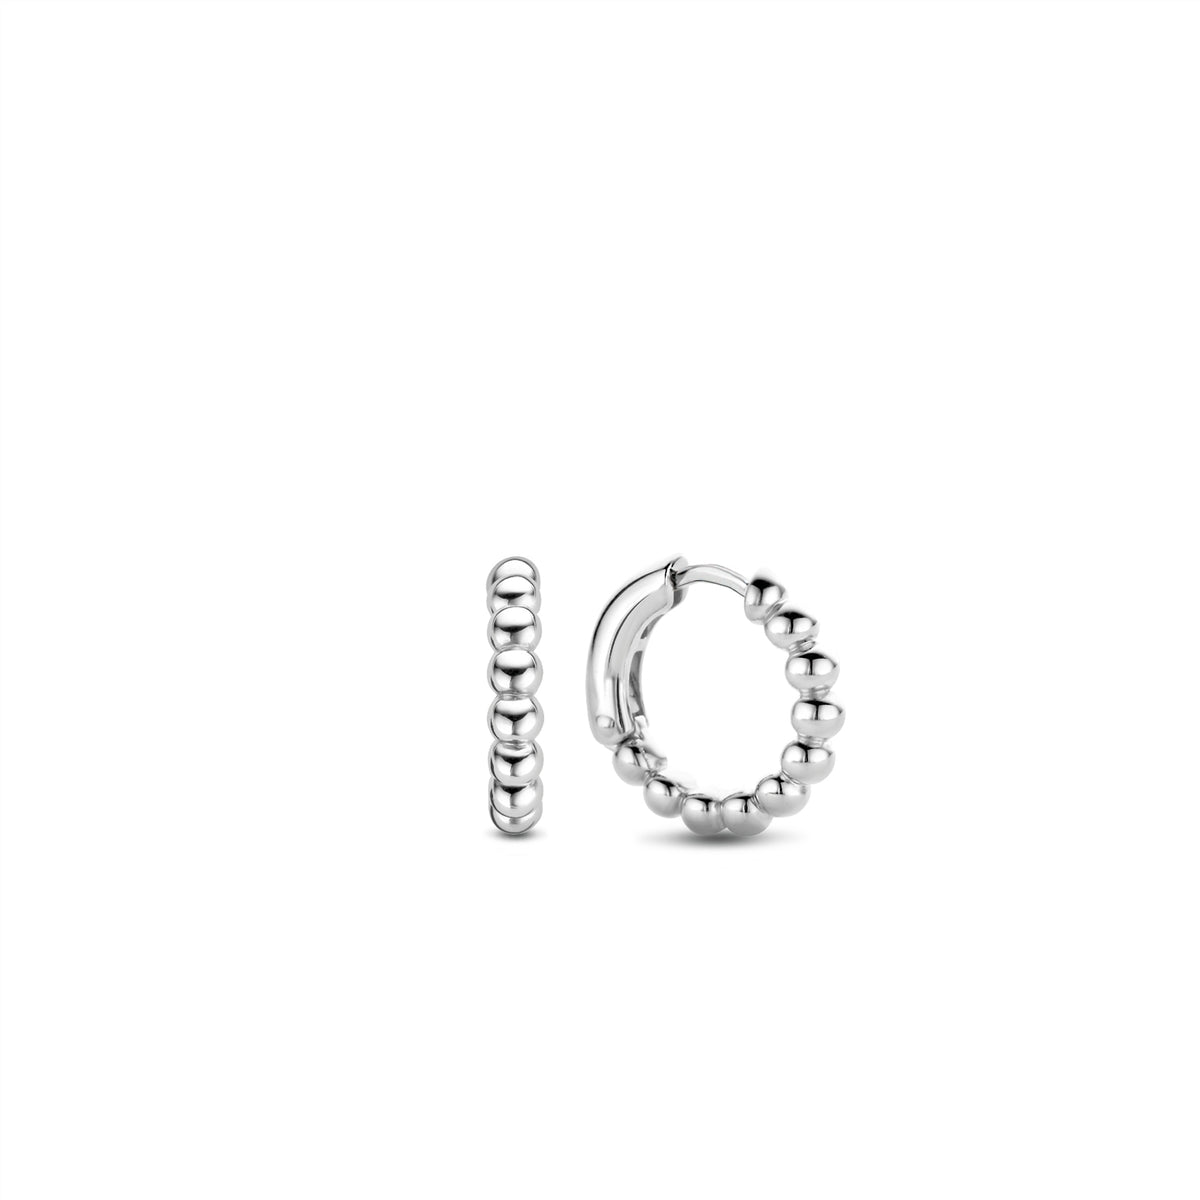 TI SENTO Sterling Silver Bead Hoops